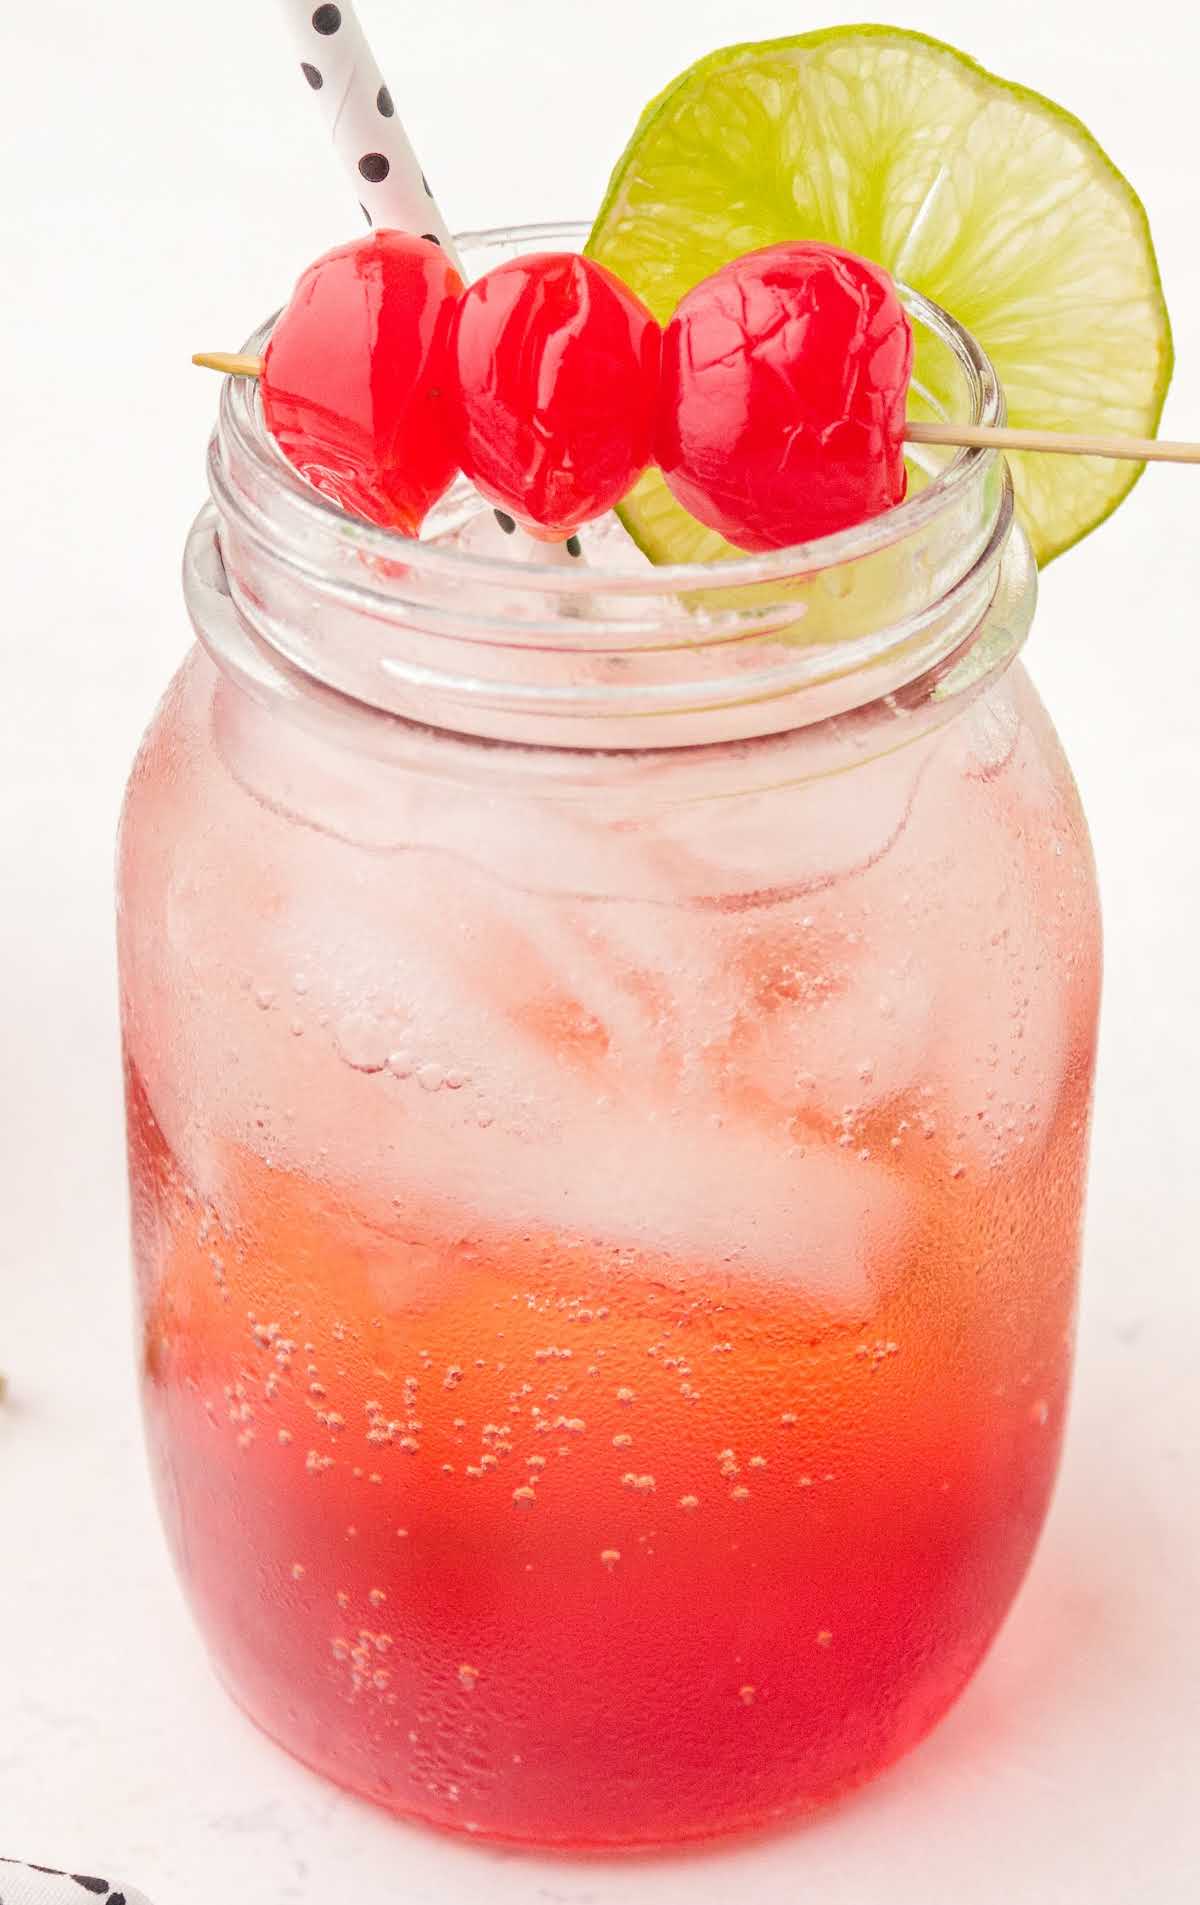 close up shot of a glass of Shirley Temple garnished with cherries and lime slices